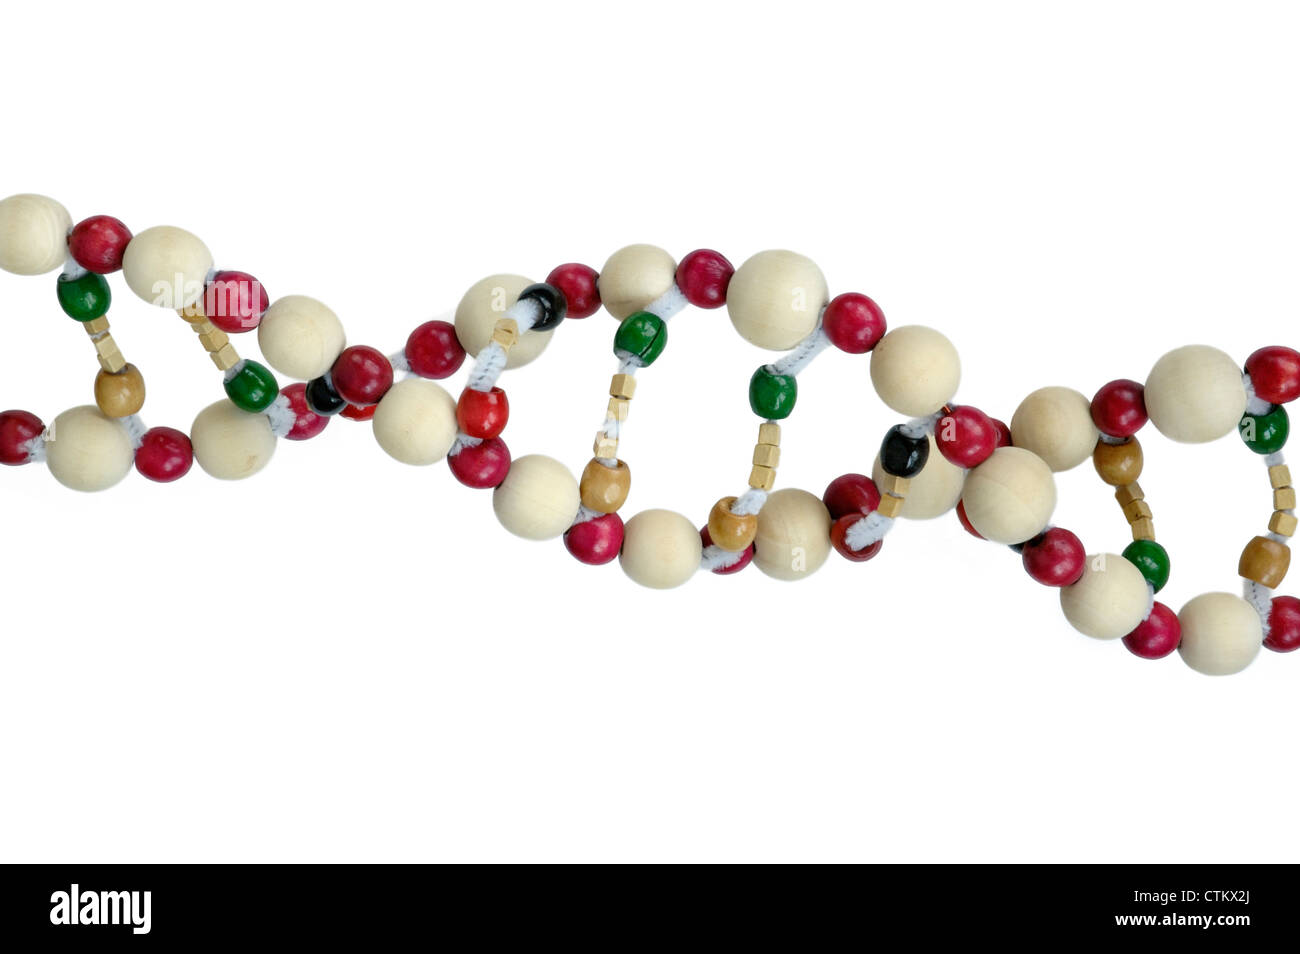 DNA double helix model made of beads Stock Photo - Alamy